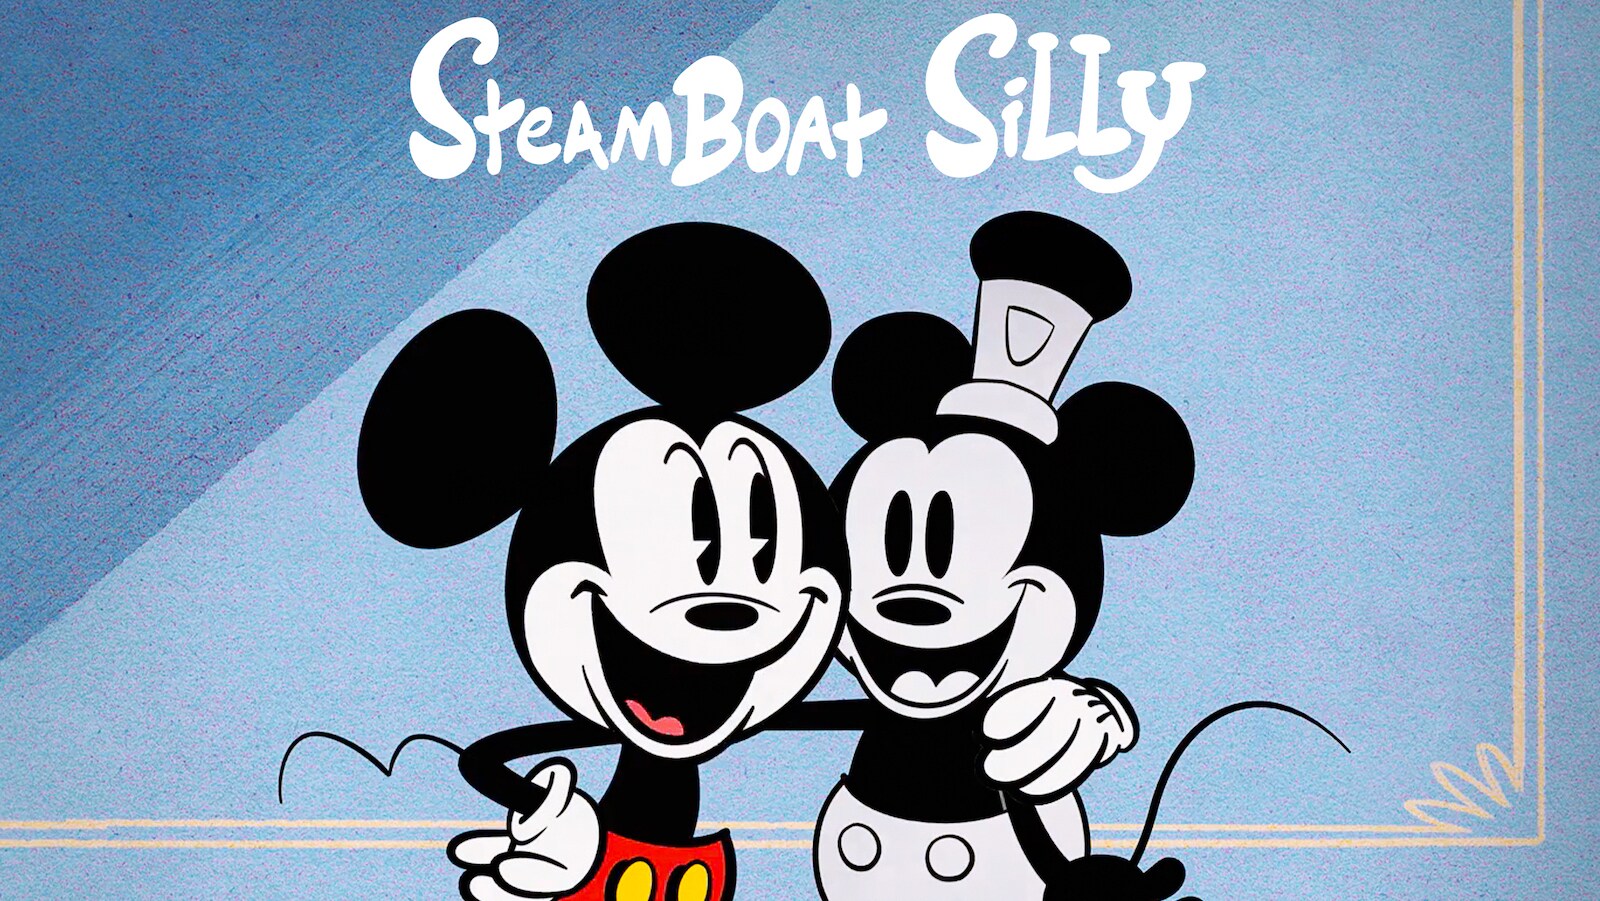 The Wonderful World of Mickey Mouse: Steamboat Silly Key Art